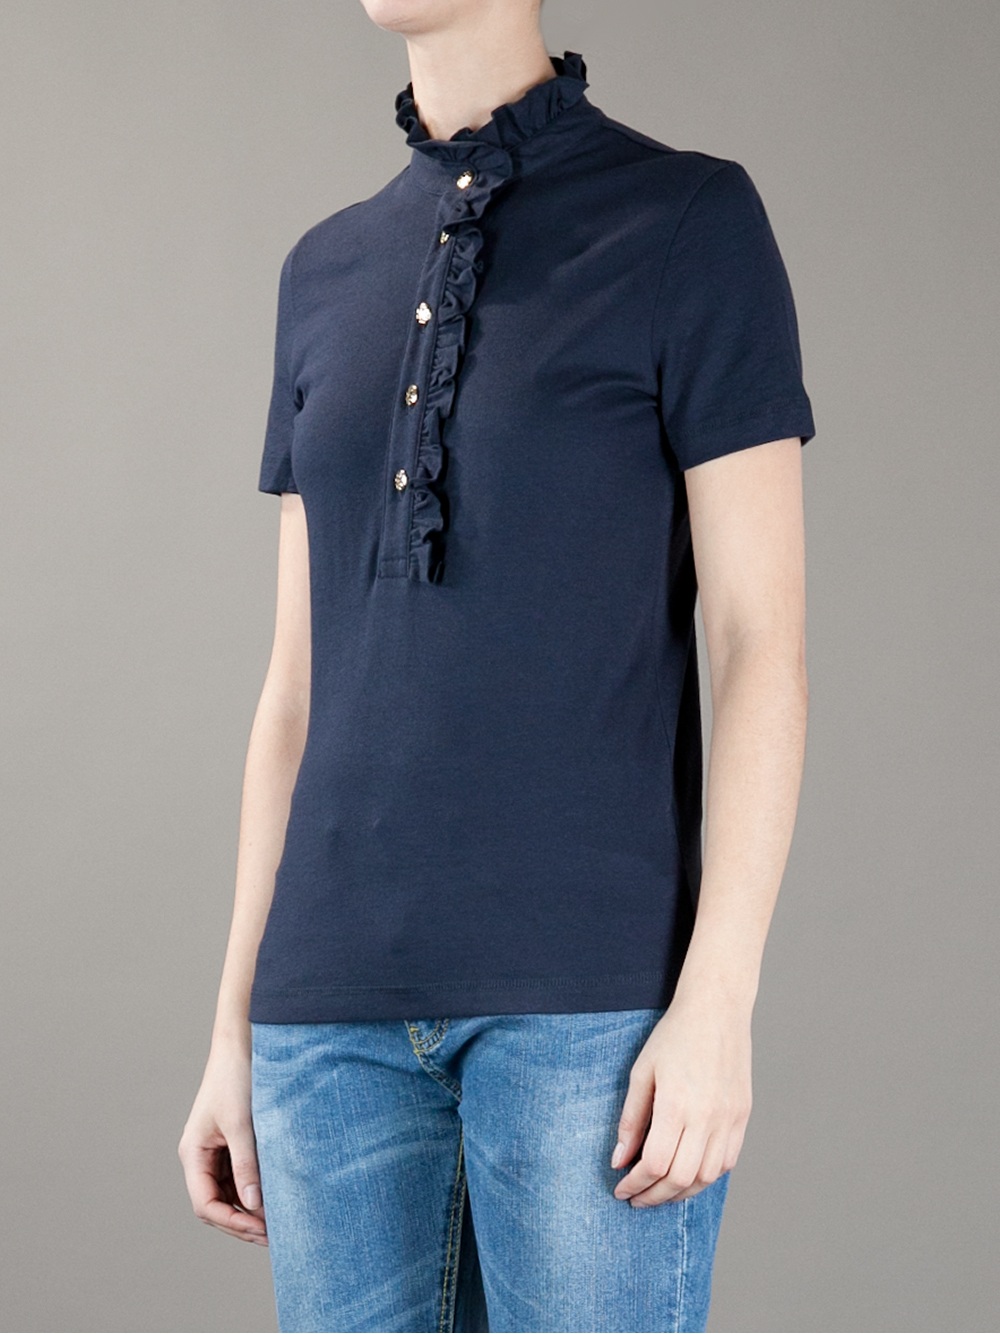 Tory Burch Frill Detail Polo Shirt in Navy (Blue) - Lyst